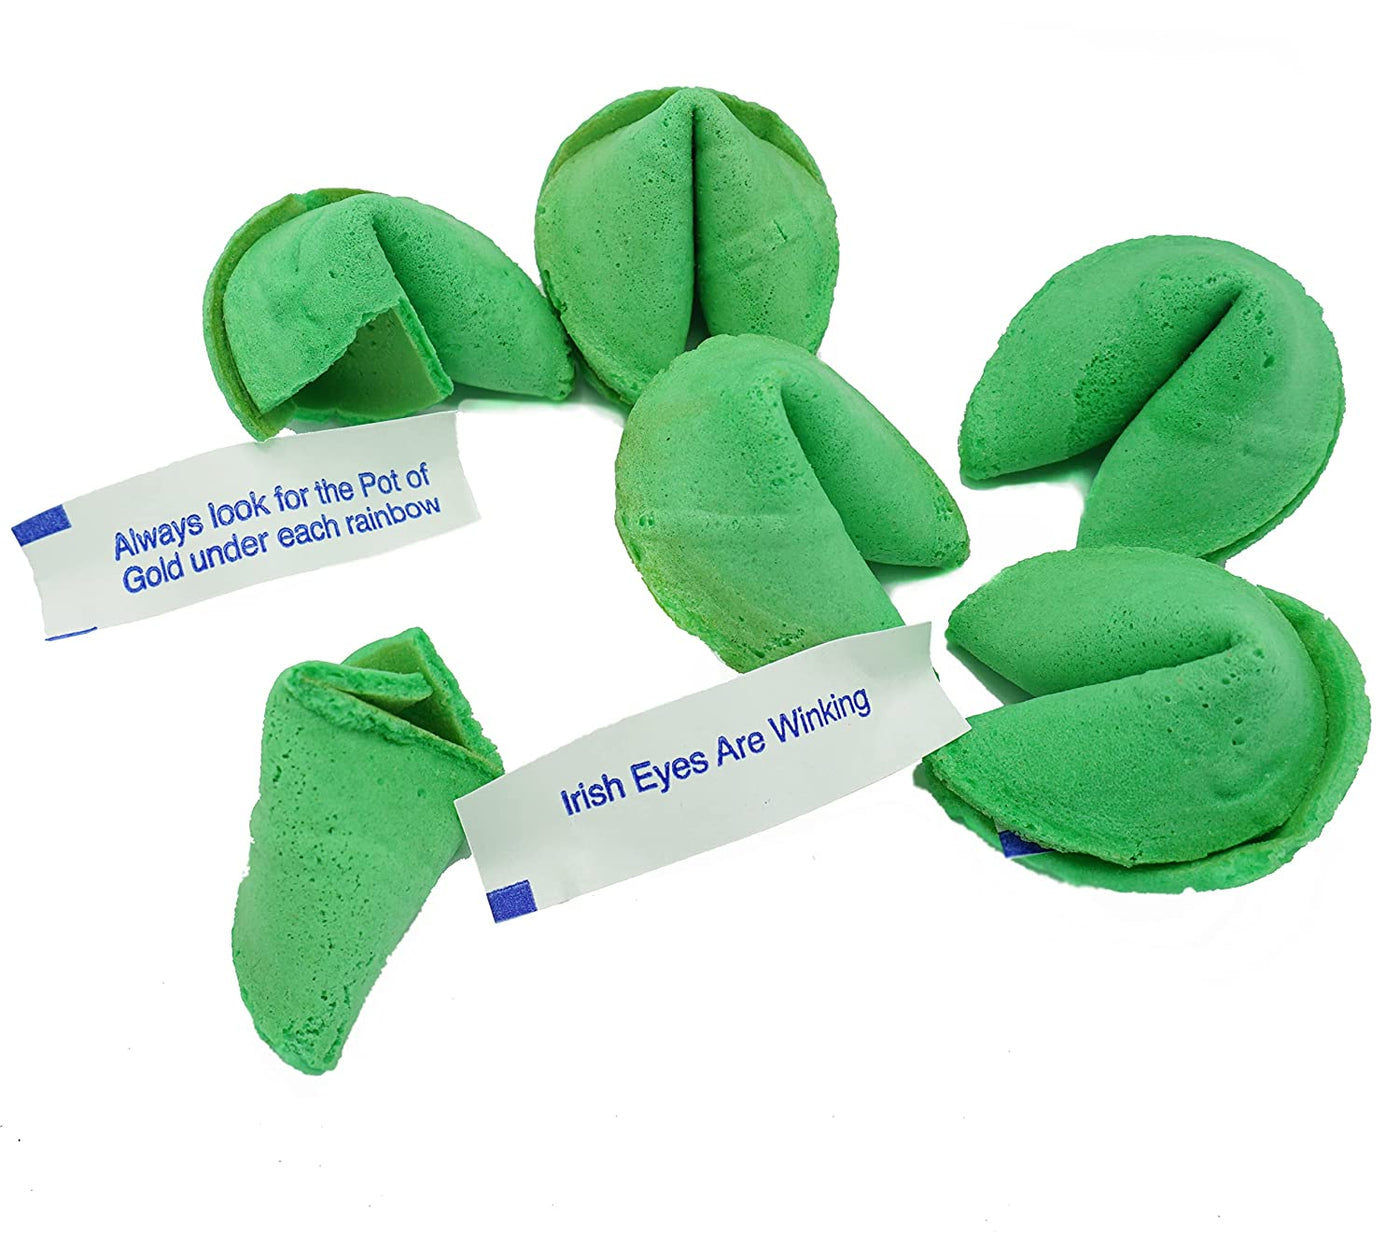 St Patricks Day Fortune Cookies (50 Individually Wrapped) Green With Irish Themed Sayings Party Favors & Treats by 4E's Novelty